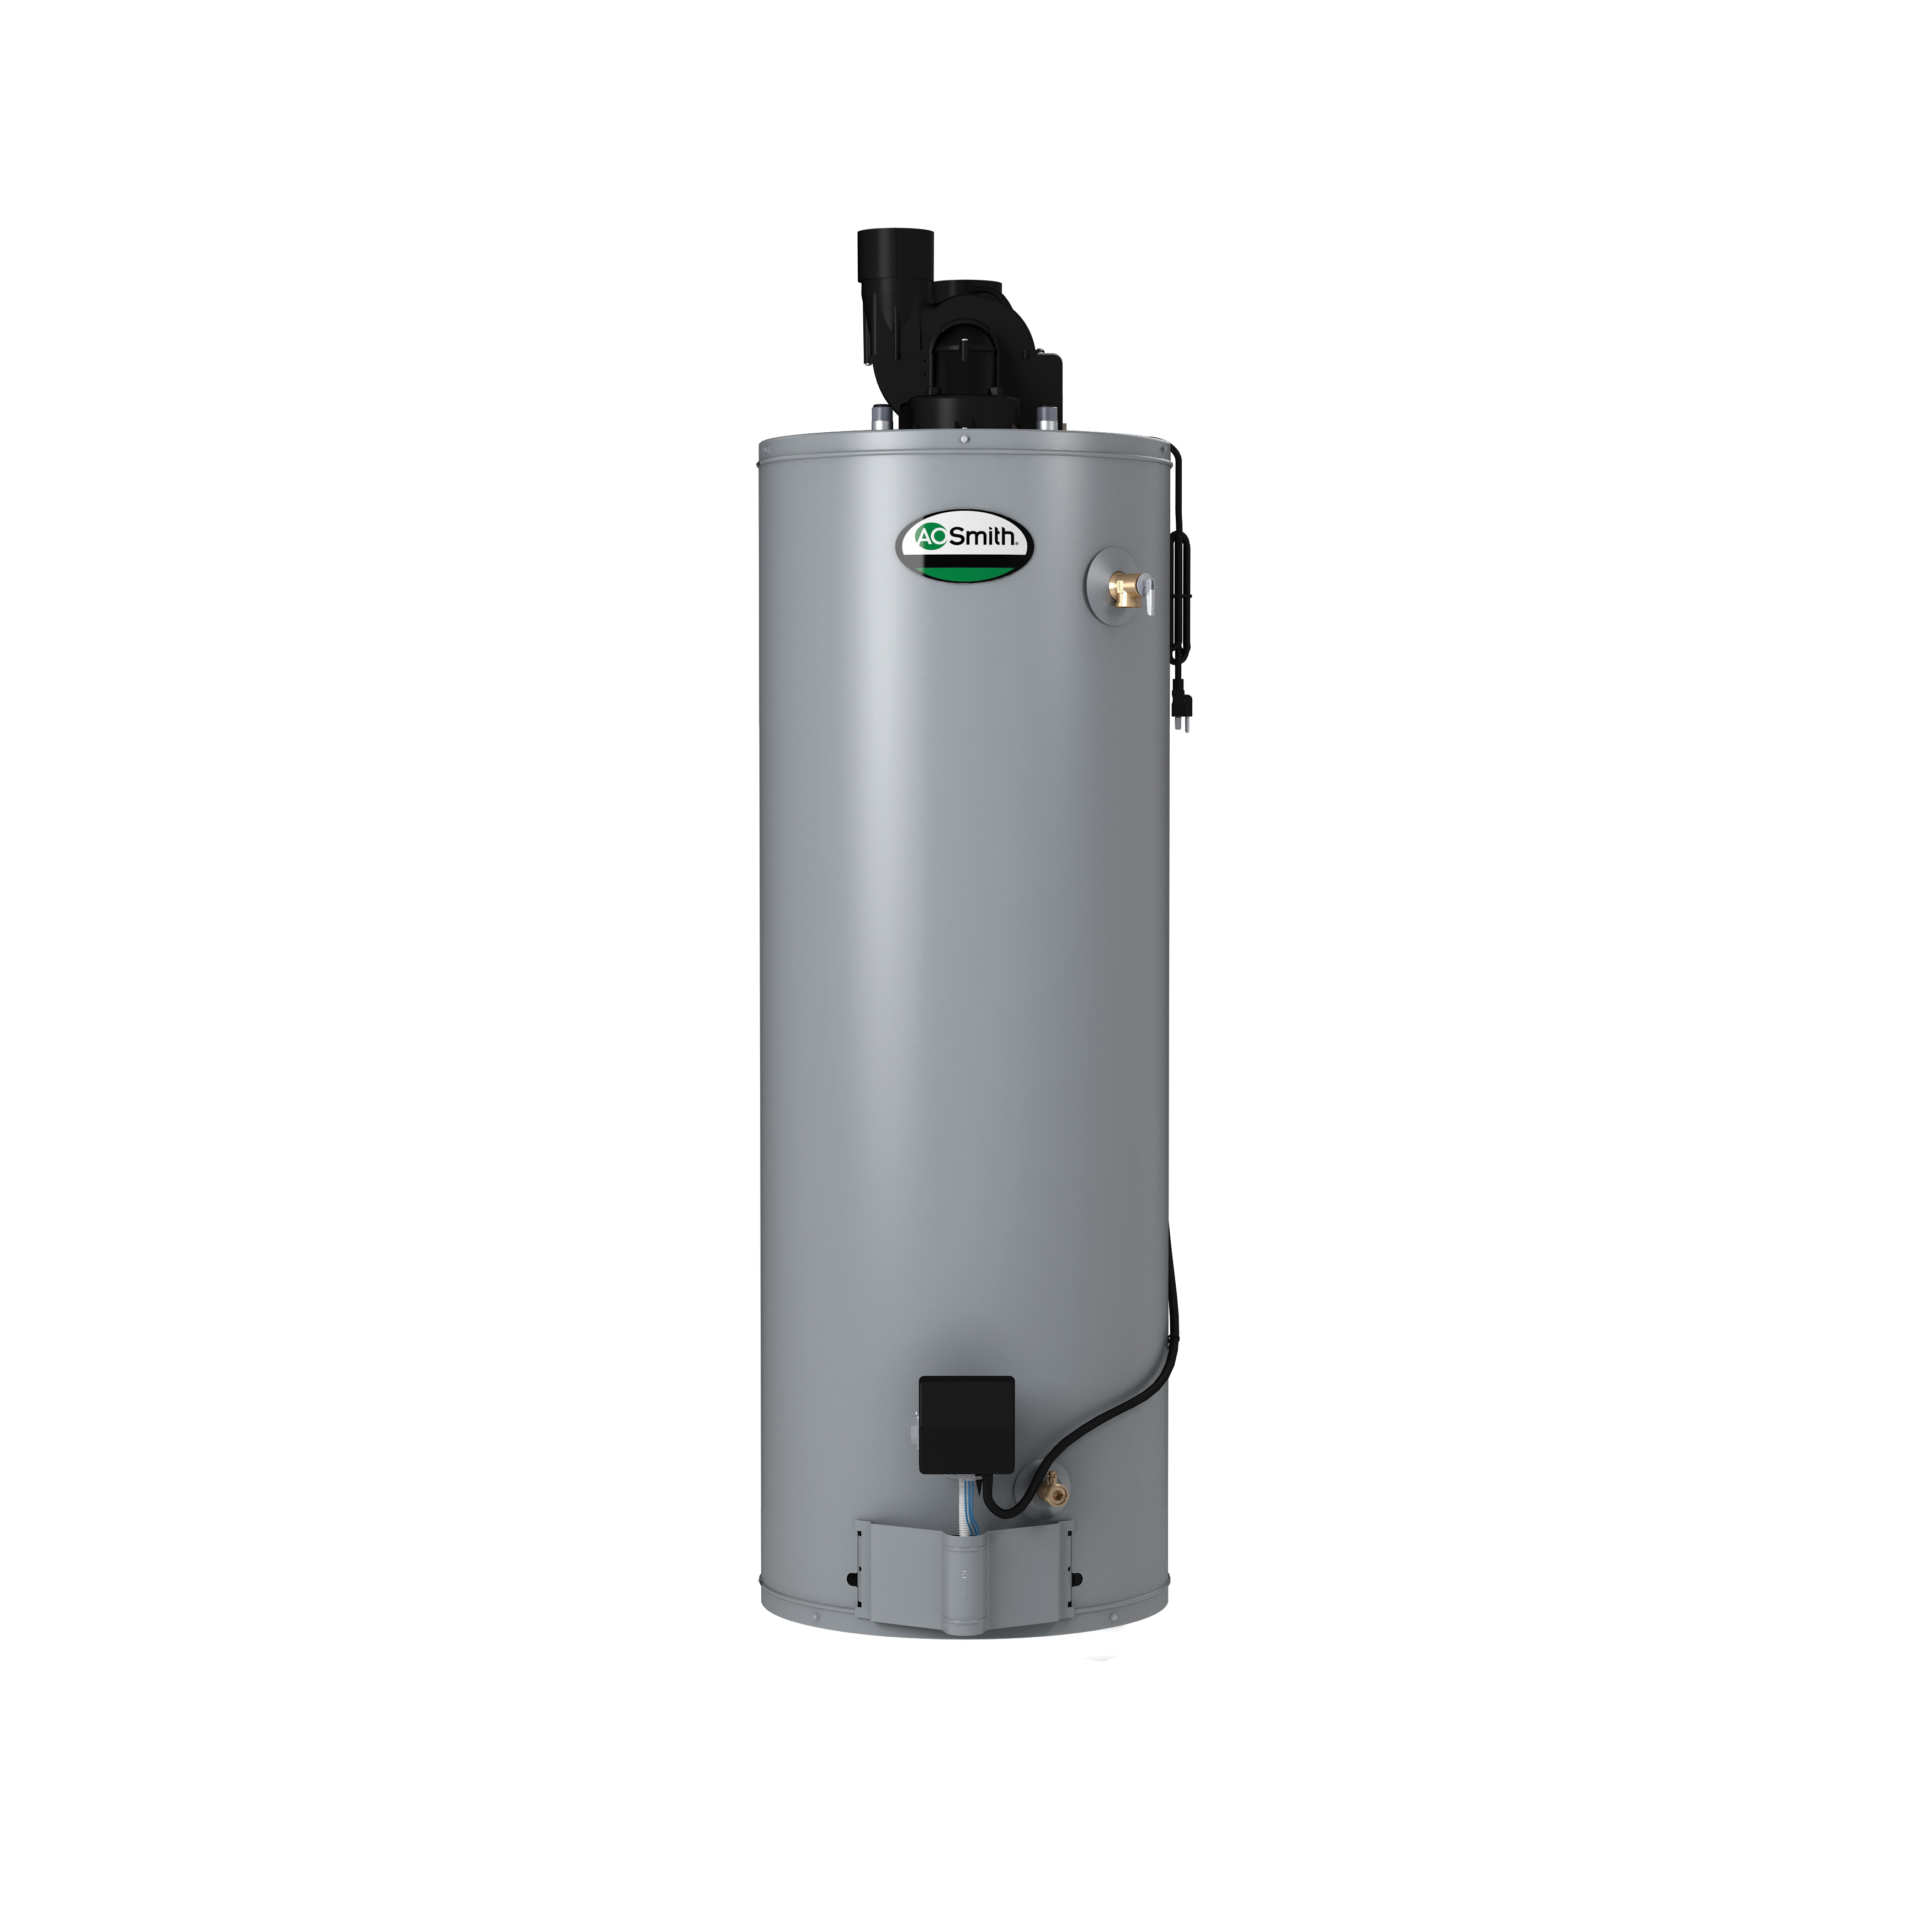 How much is a 50 gallon ao smith water heater Ao Smith Promax 100115134 Gpdt 50 50 Gallon Gas Water Heater 45000 Btu Hr Heating Natural Gas Fuel Zinc Anode Rod Power Direct Vent Tall Indoor First Supply